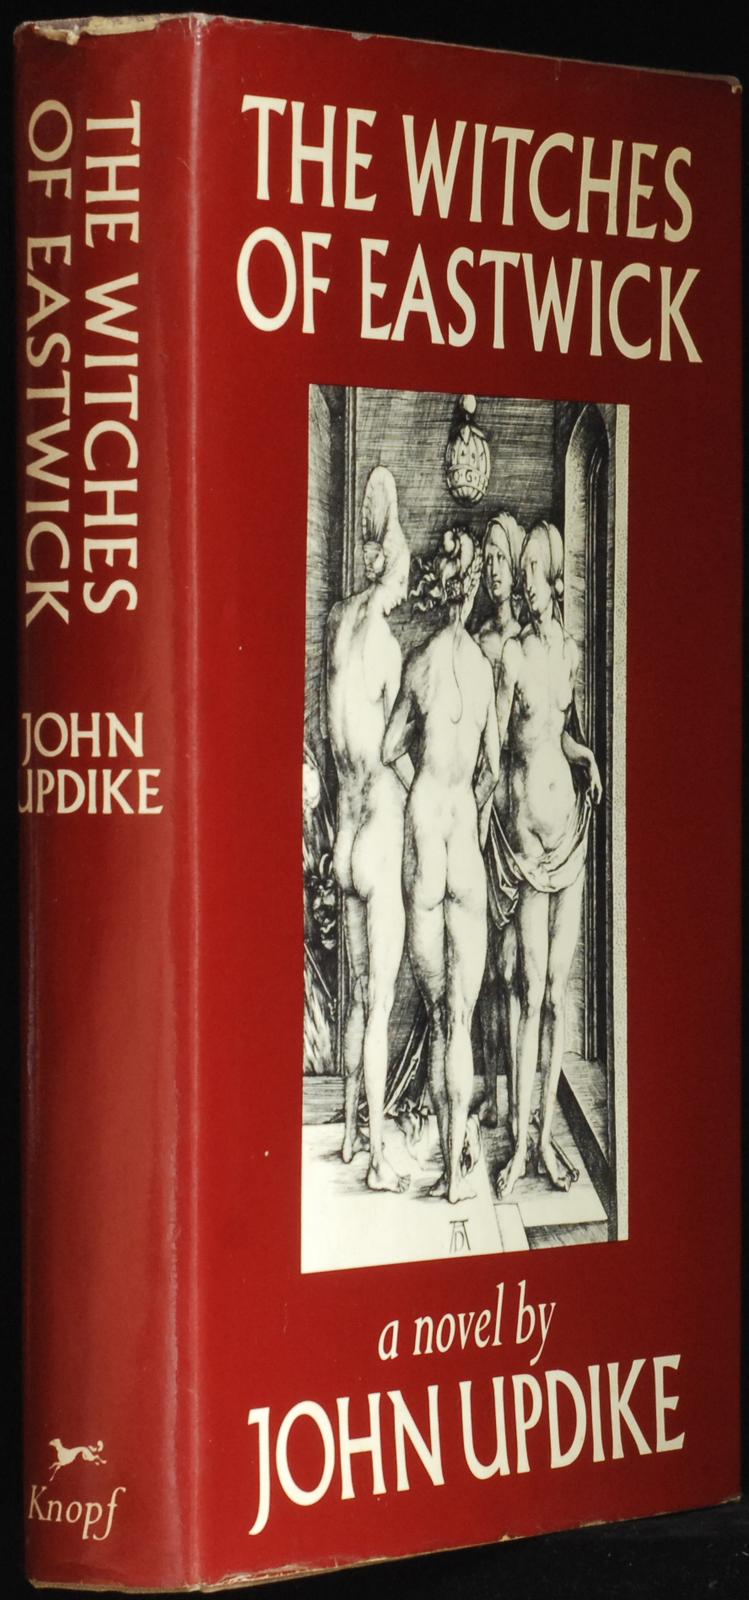 mbb006795c_-_Updike_John_-_The_Witches_Of_Eastwick.jpg